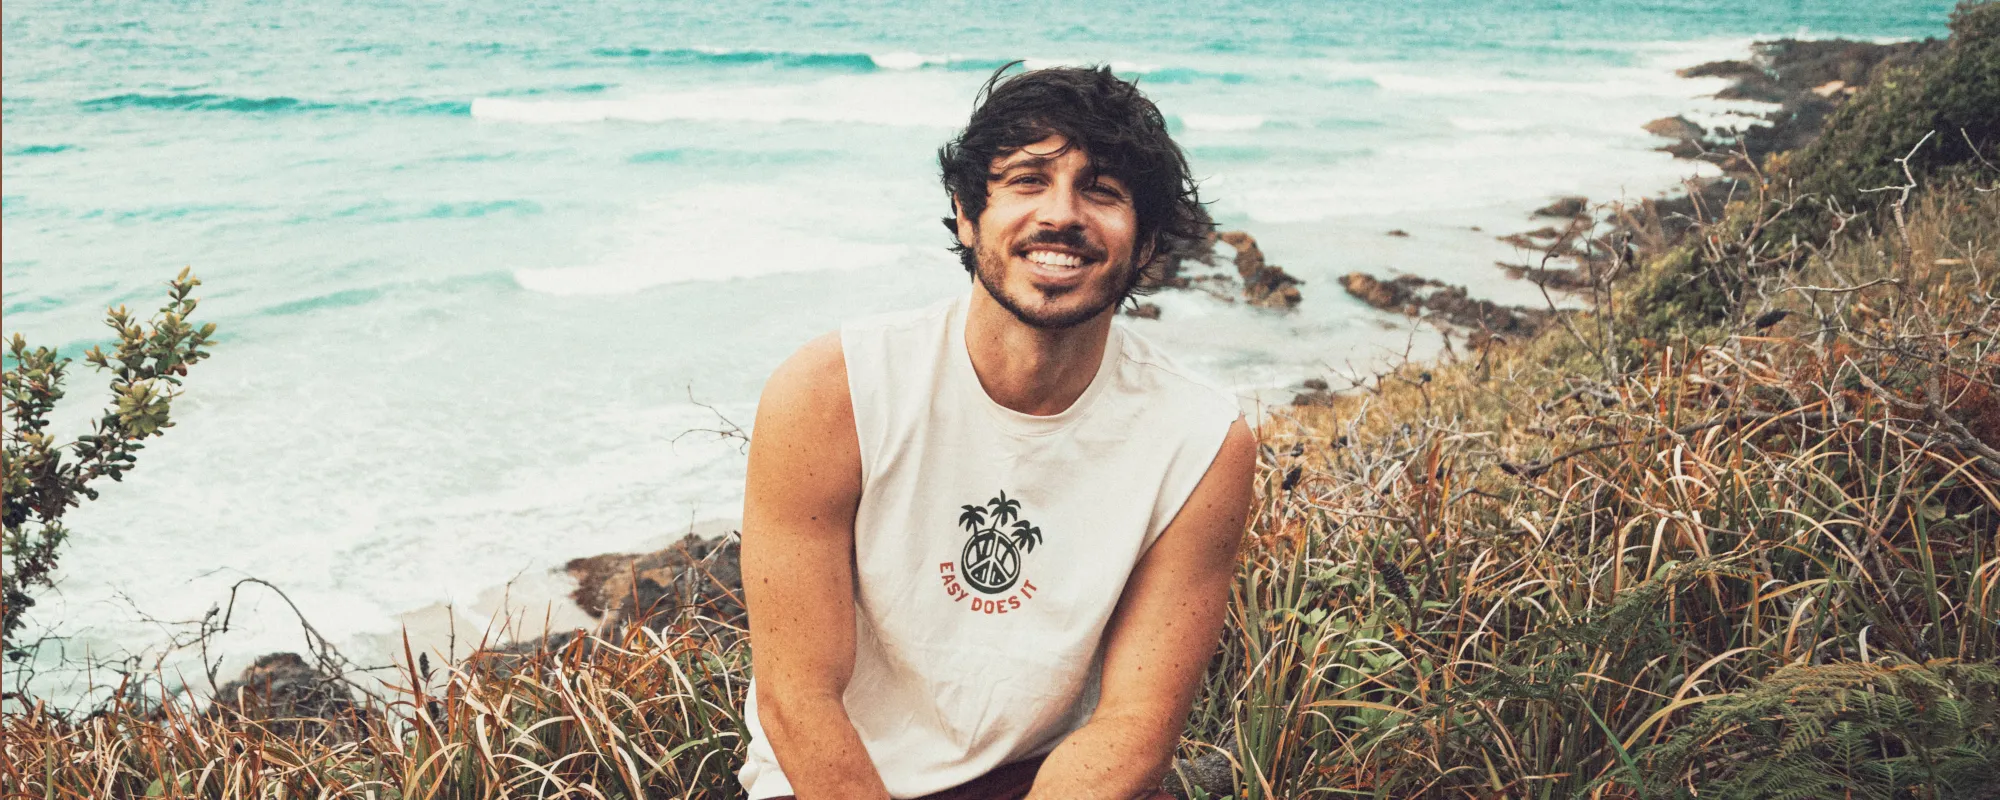 Morgan Evans Faces Ups and Downs on New EP: “The Most Authentic Way to Represent This Time in My Life”